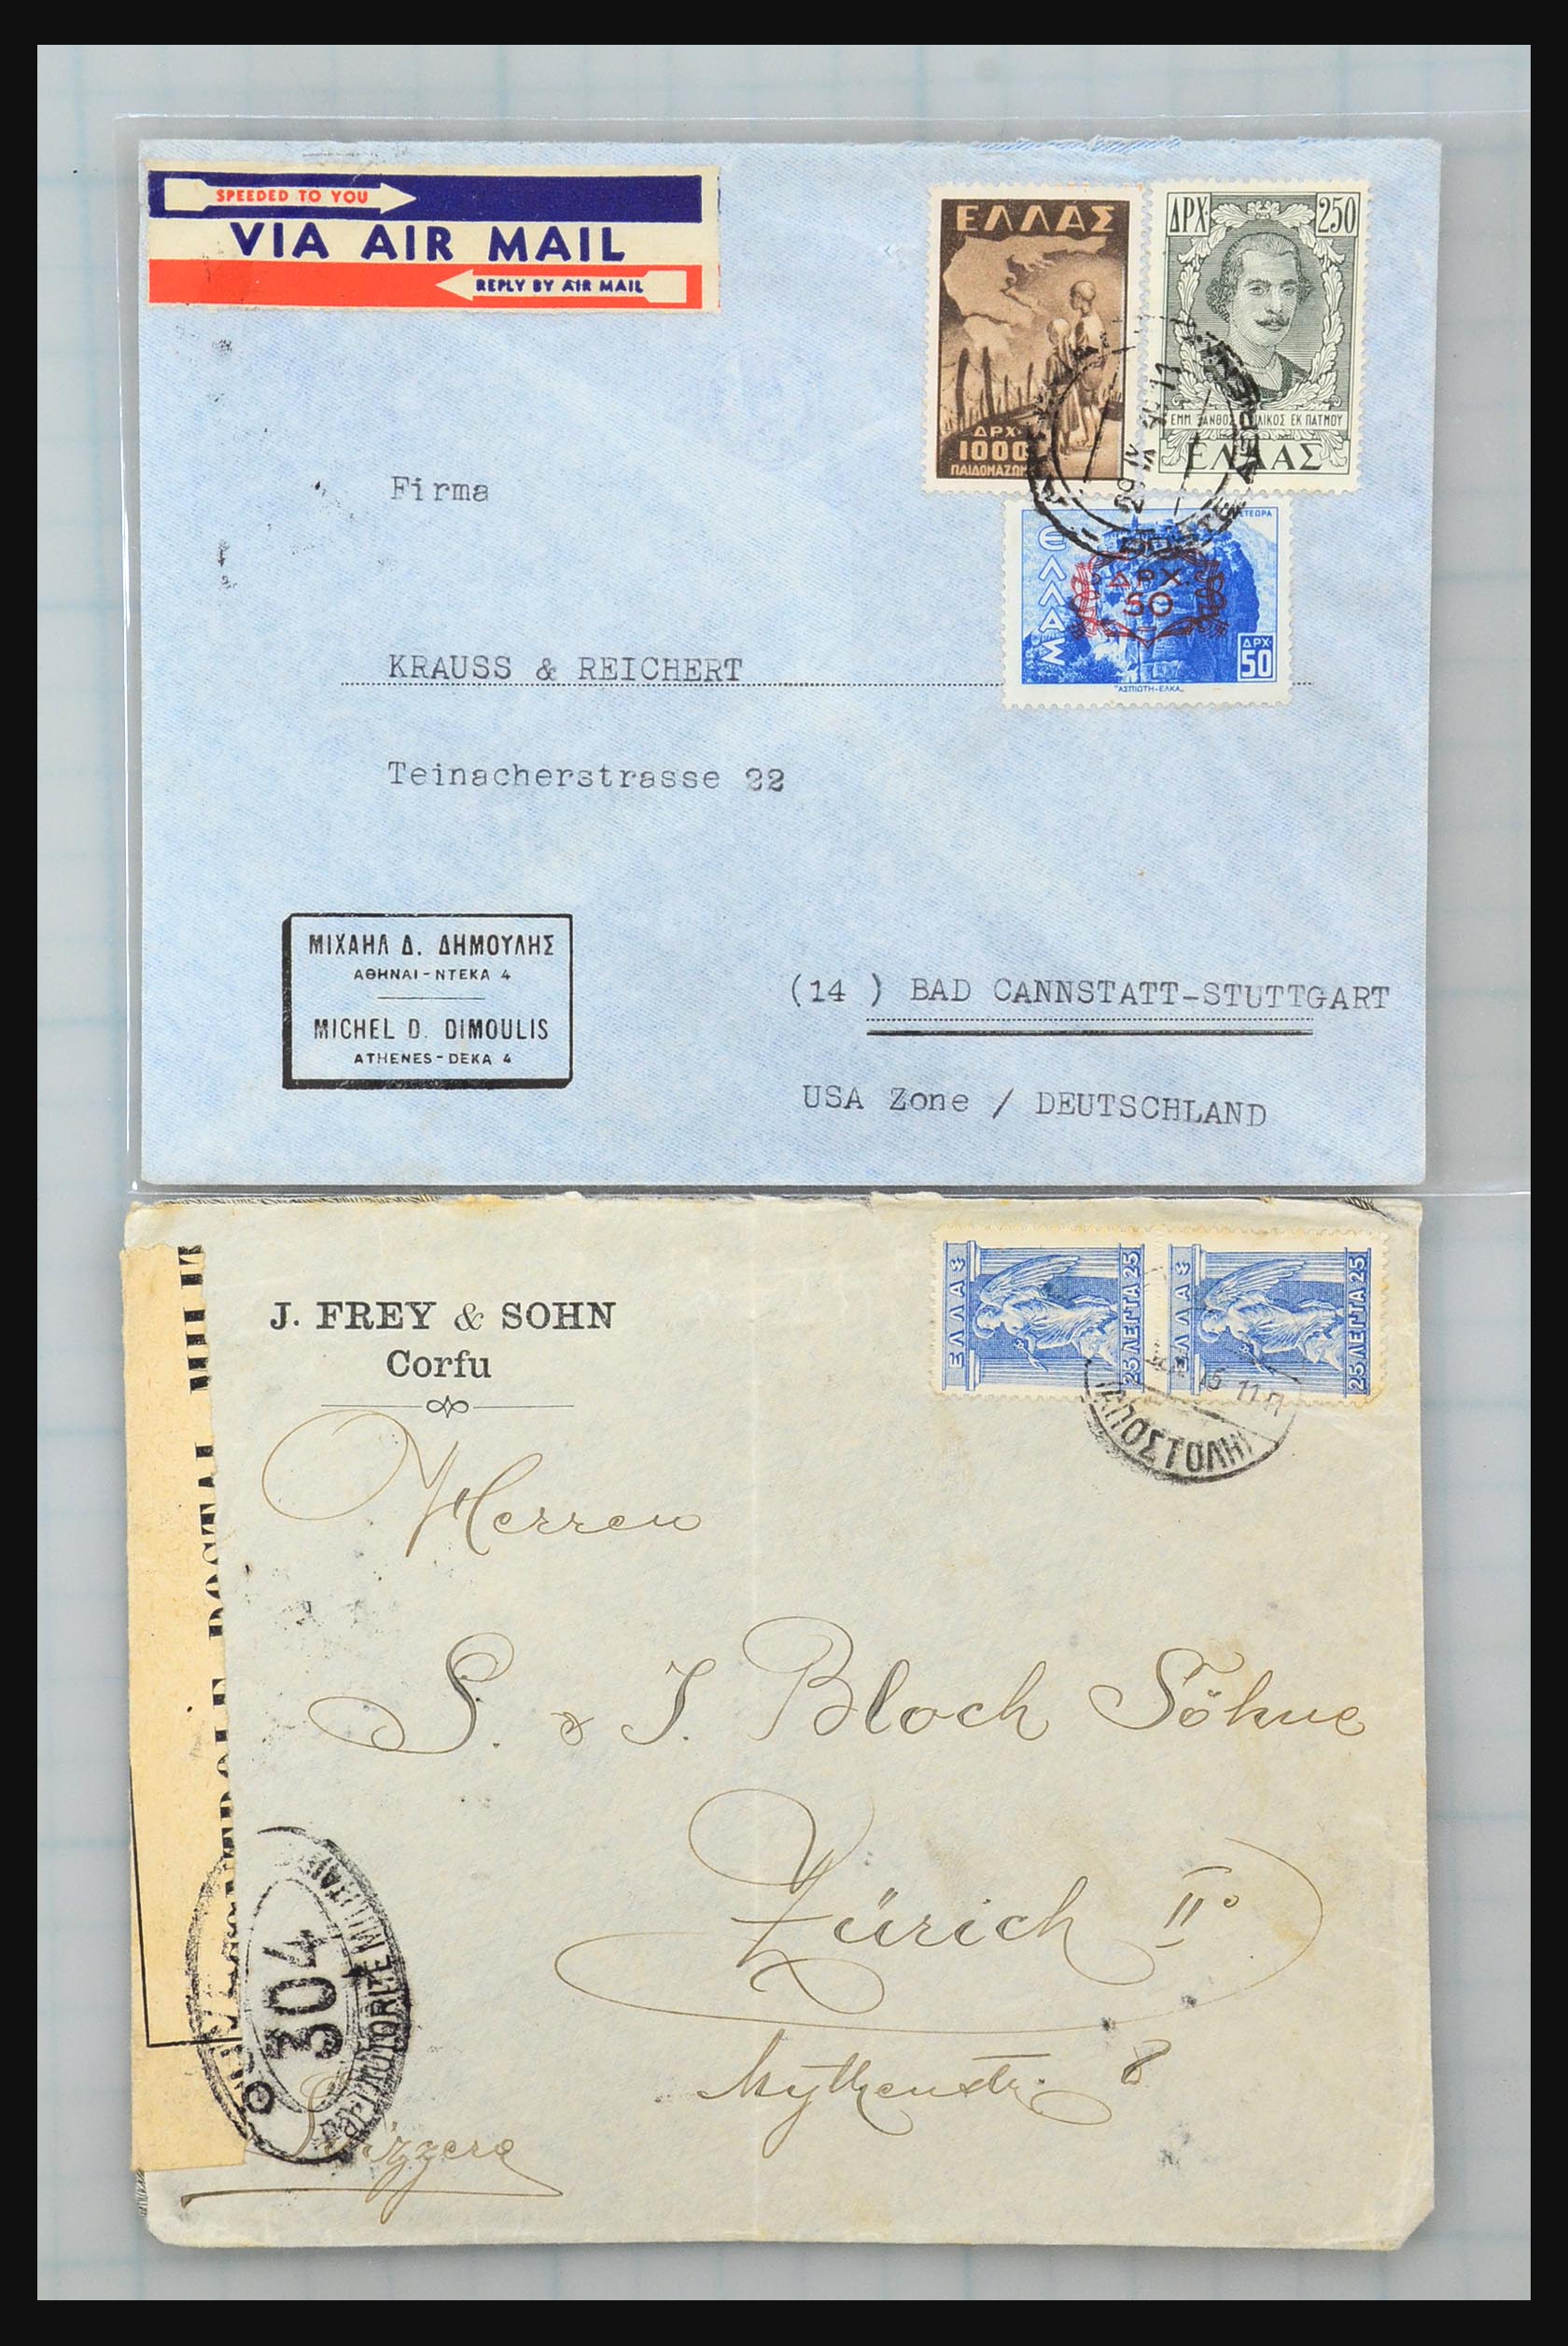 31358 036 - 31358 Portugal/Luxemburg/Greece covers 1880-1960.